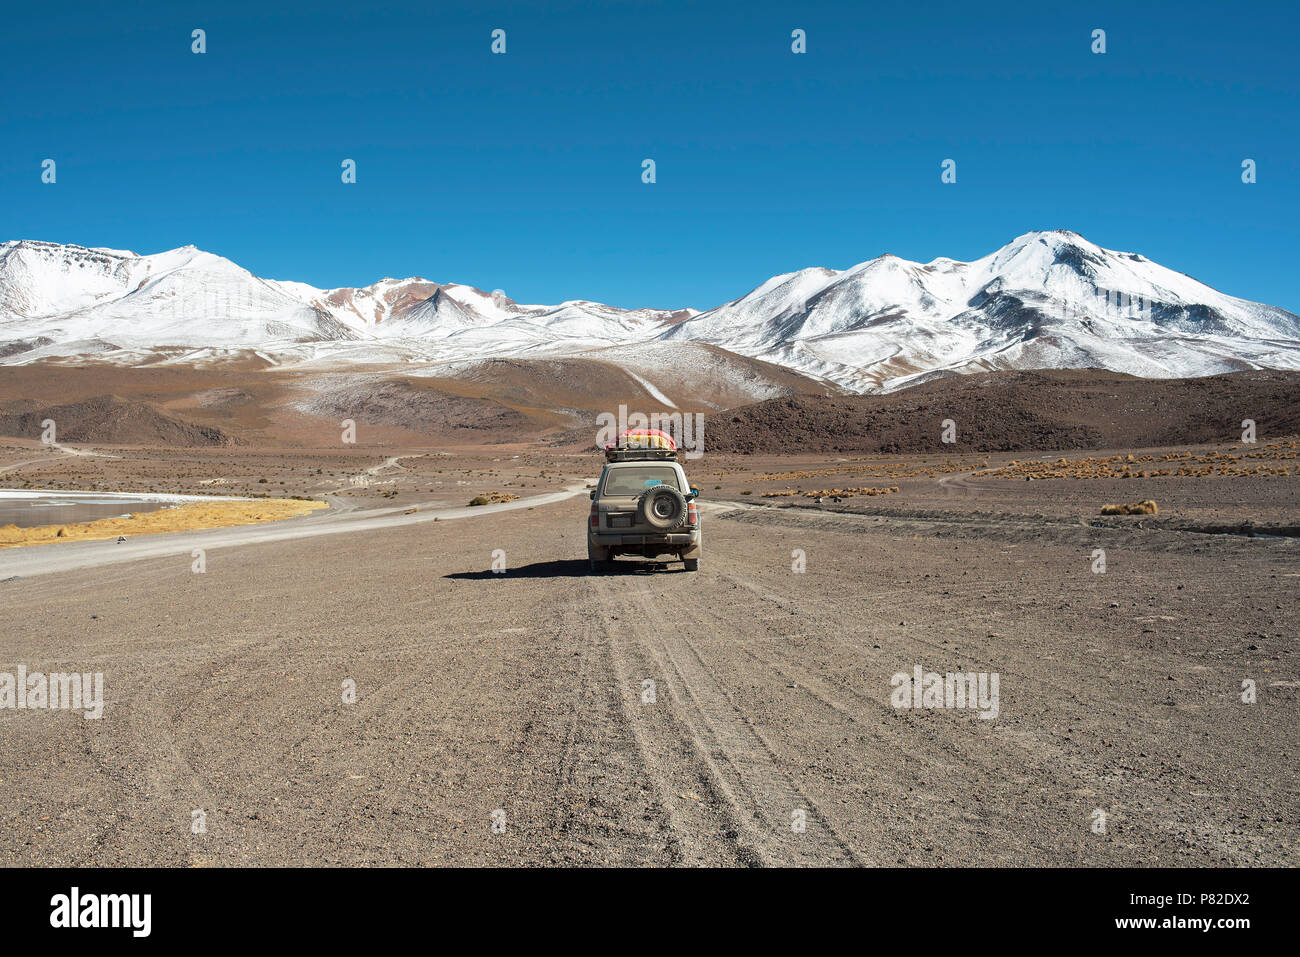 4WD Toyota car driving through the picturesque landscape of The Eduardo Abaroa Andean Fauna National Reserve in Bolivia. Stock Photo